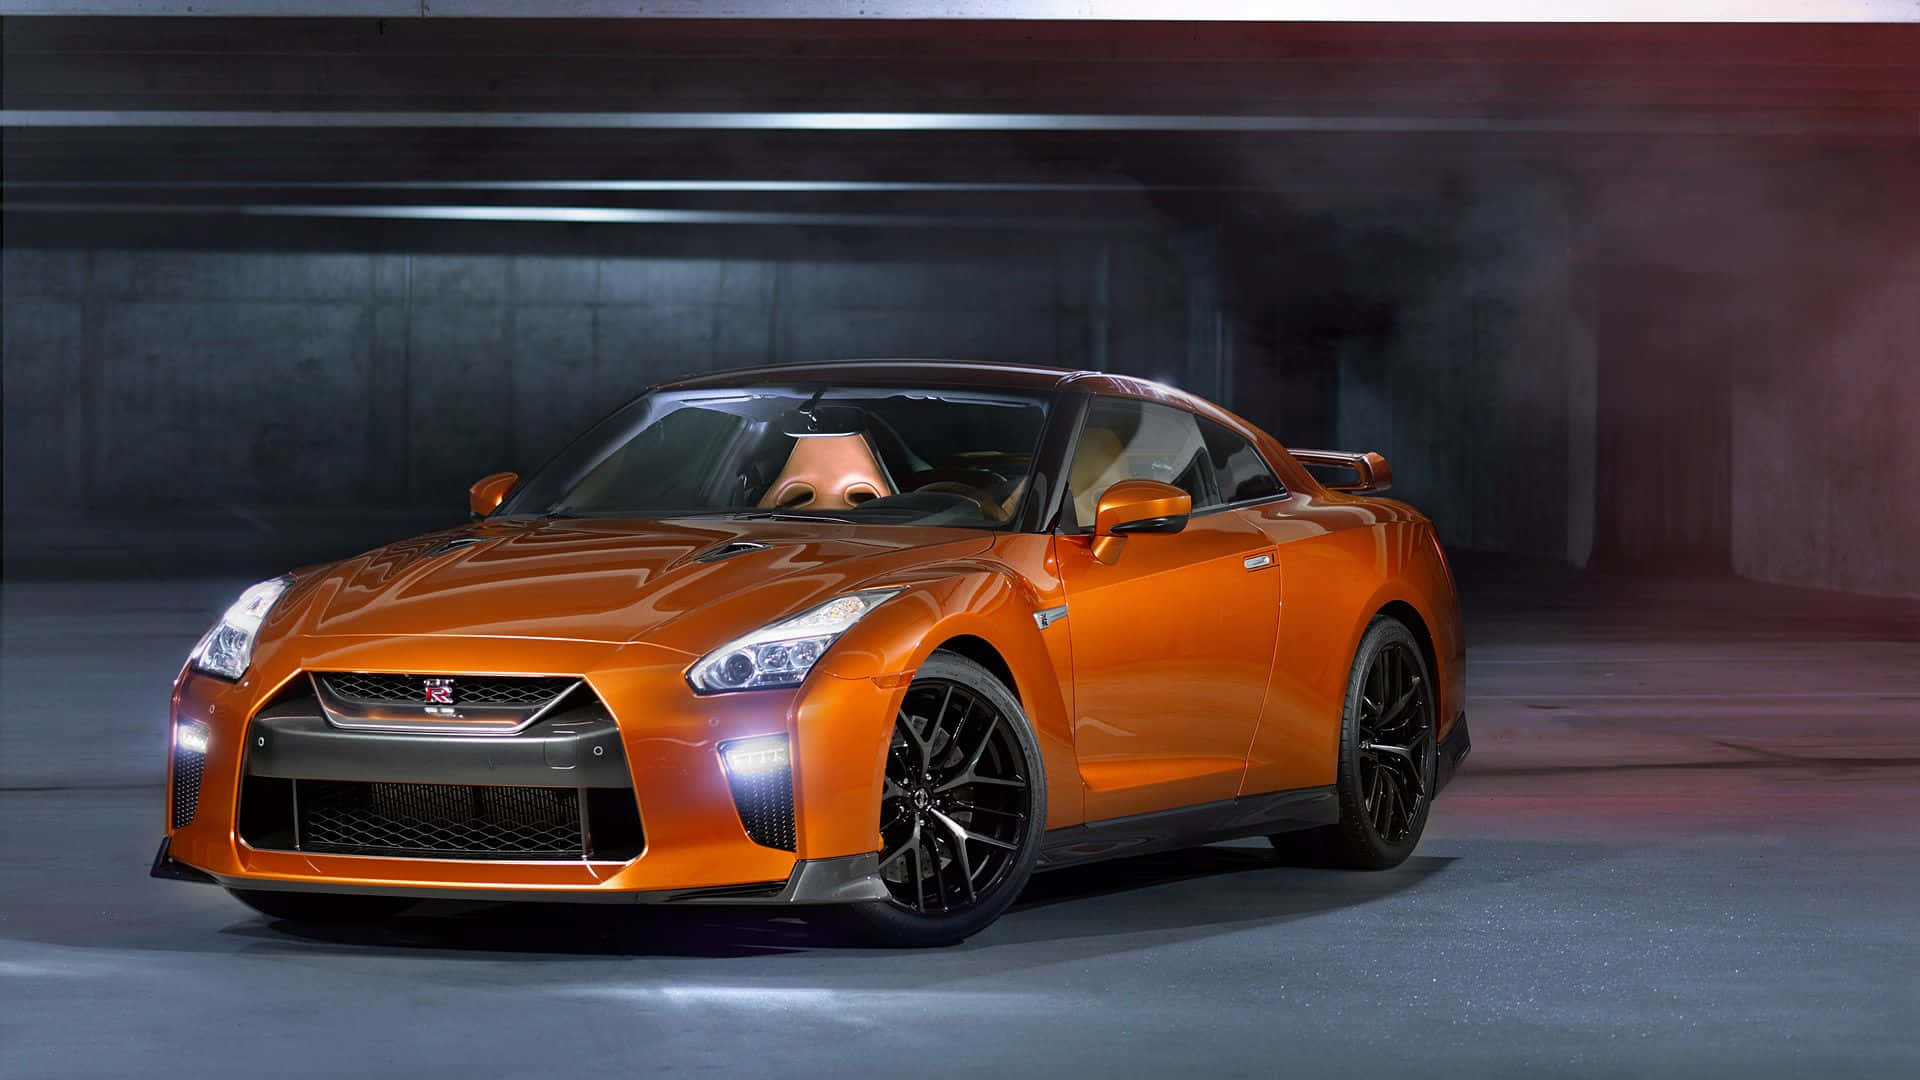 Explore The City In The Powerful Gtr R35 Background